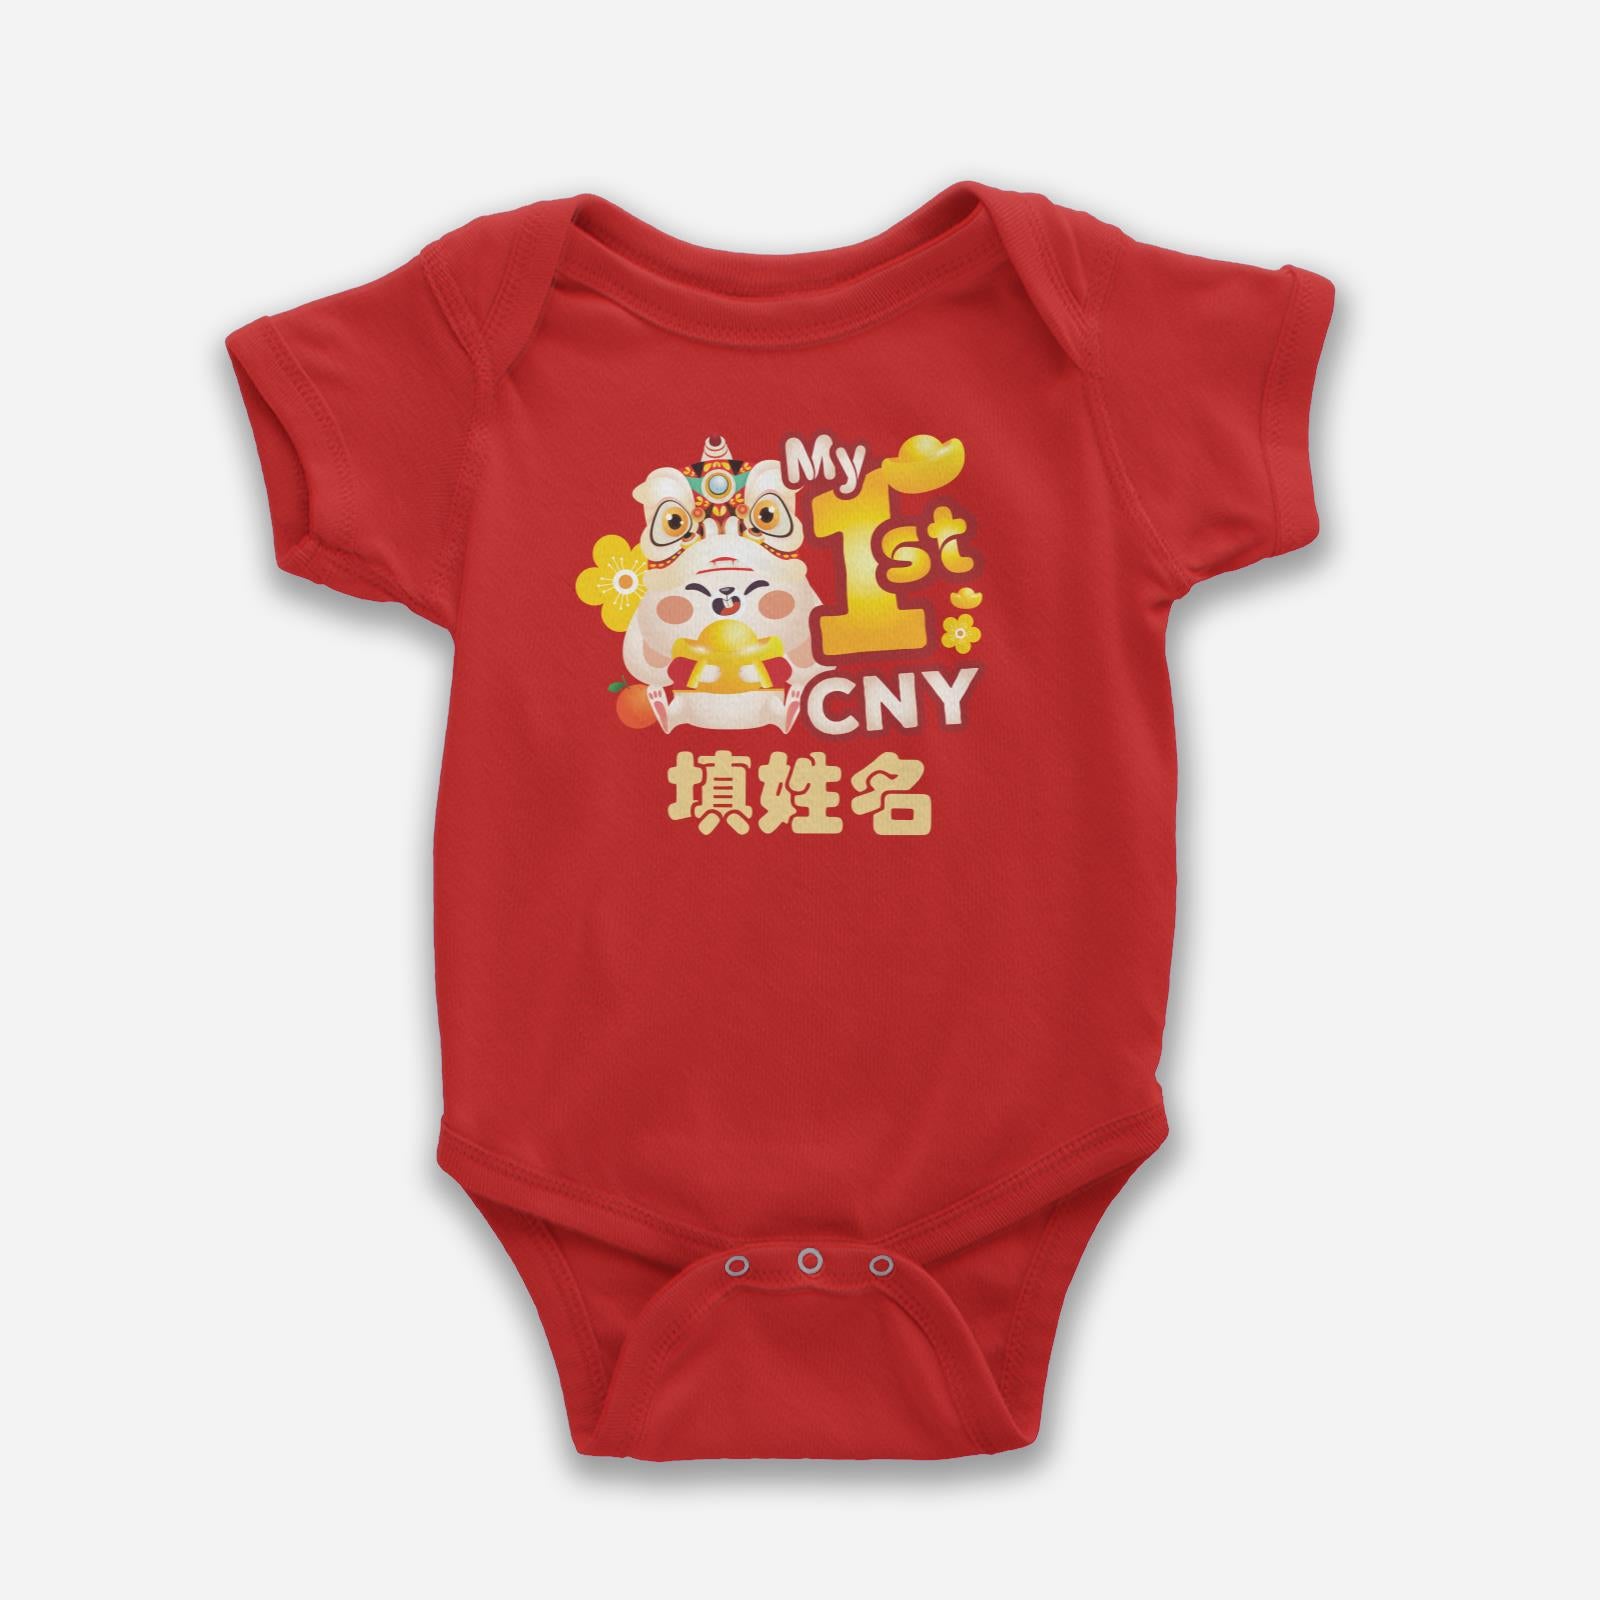 Cny Rabbit Family - My First Cny Baby Romper With Chinese Personalization